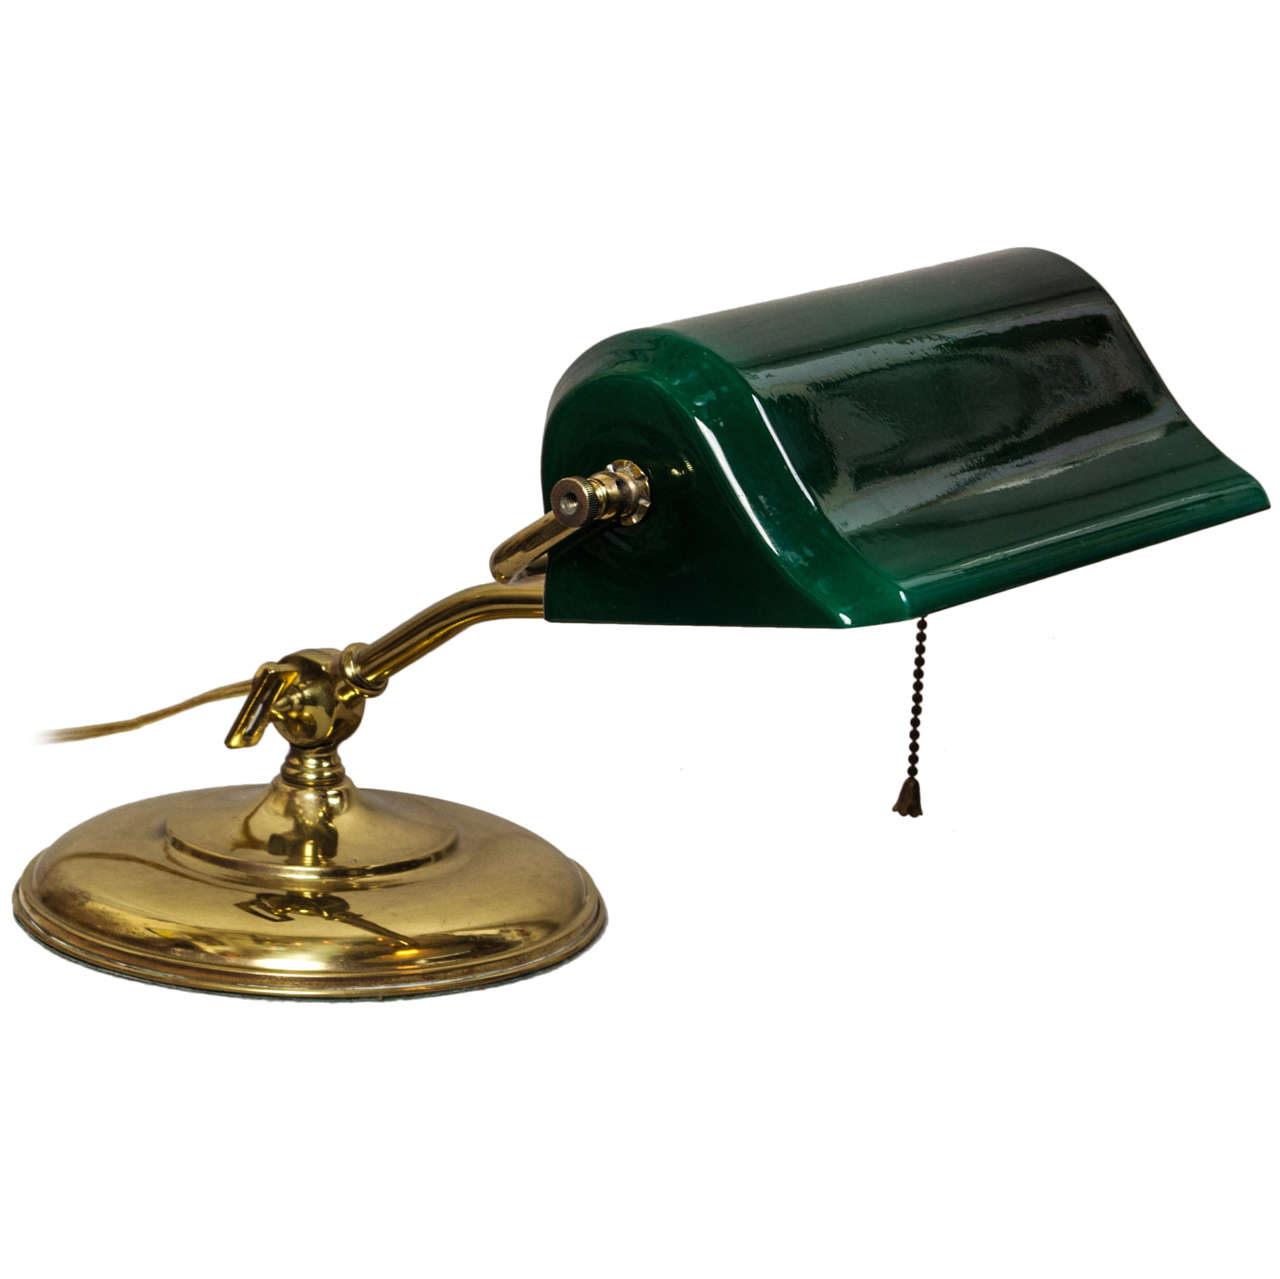 Banker's Desk Lamp with Cased Green Glass Shade